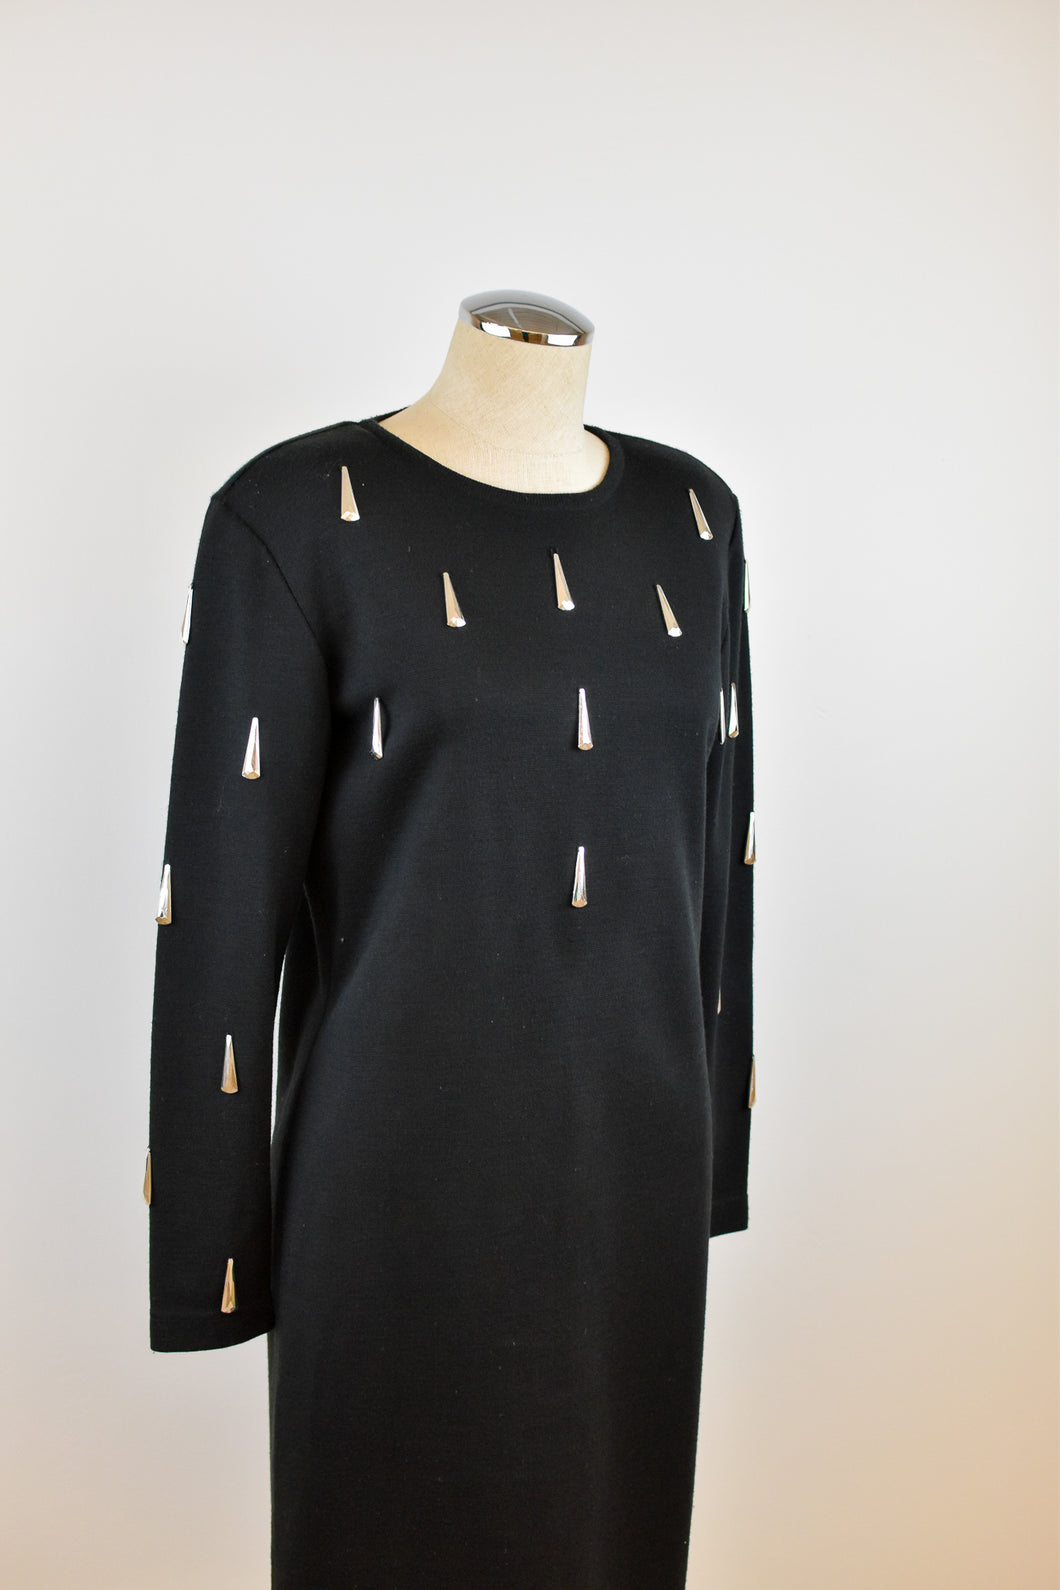 1990’s | Black  Knit Dress with Silver Tear Drop Beads